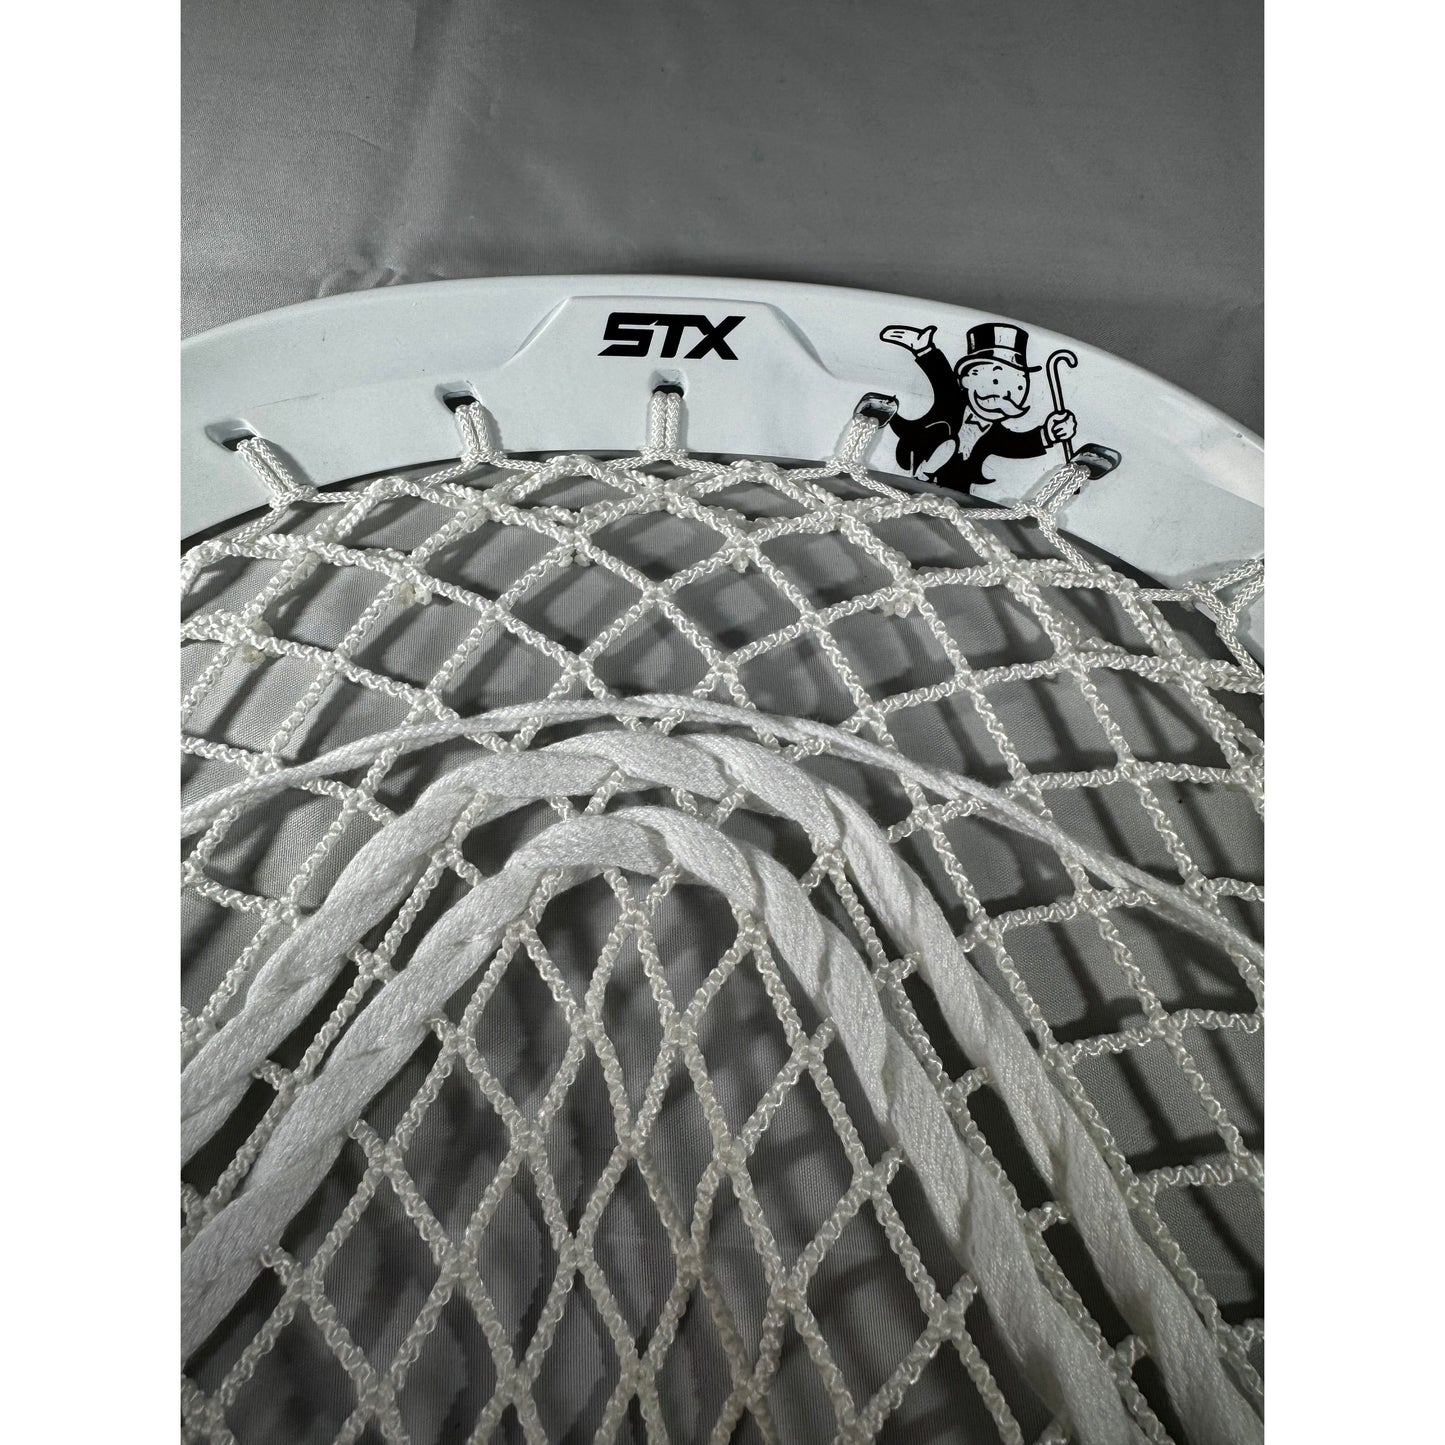 Custom Monopoly Dyed STX Lacrosse Eclipse 3 Goalie Head with 11D Eclipse Mesh